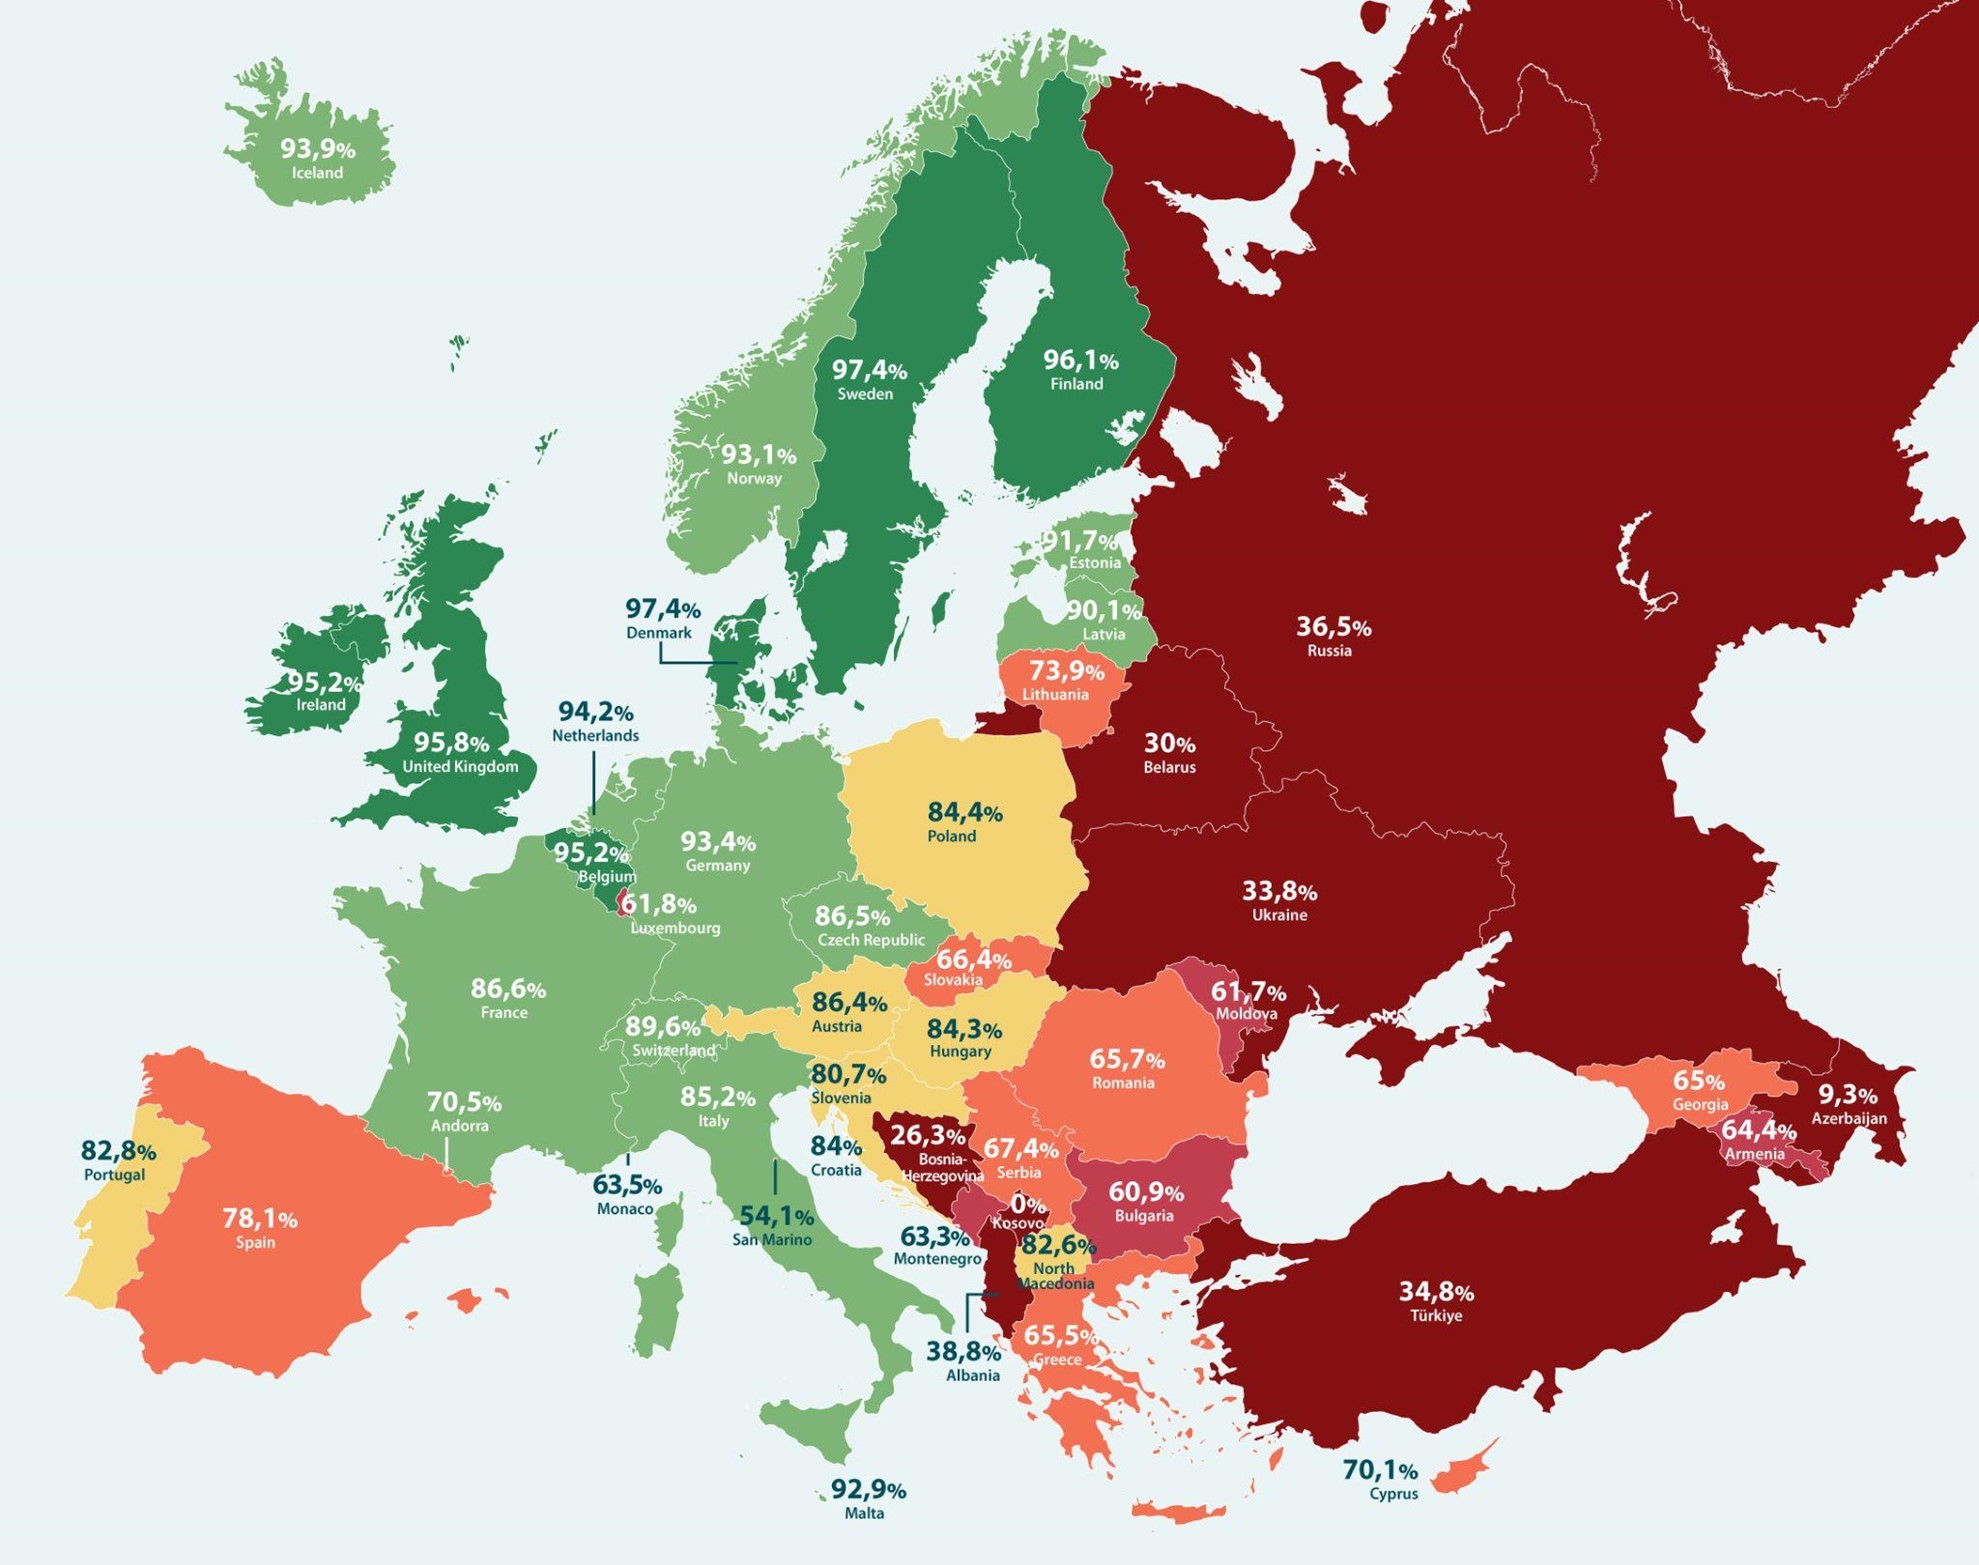 Map of Europe showing best performing and worst performing countries in terms of national policies on HPV elimination